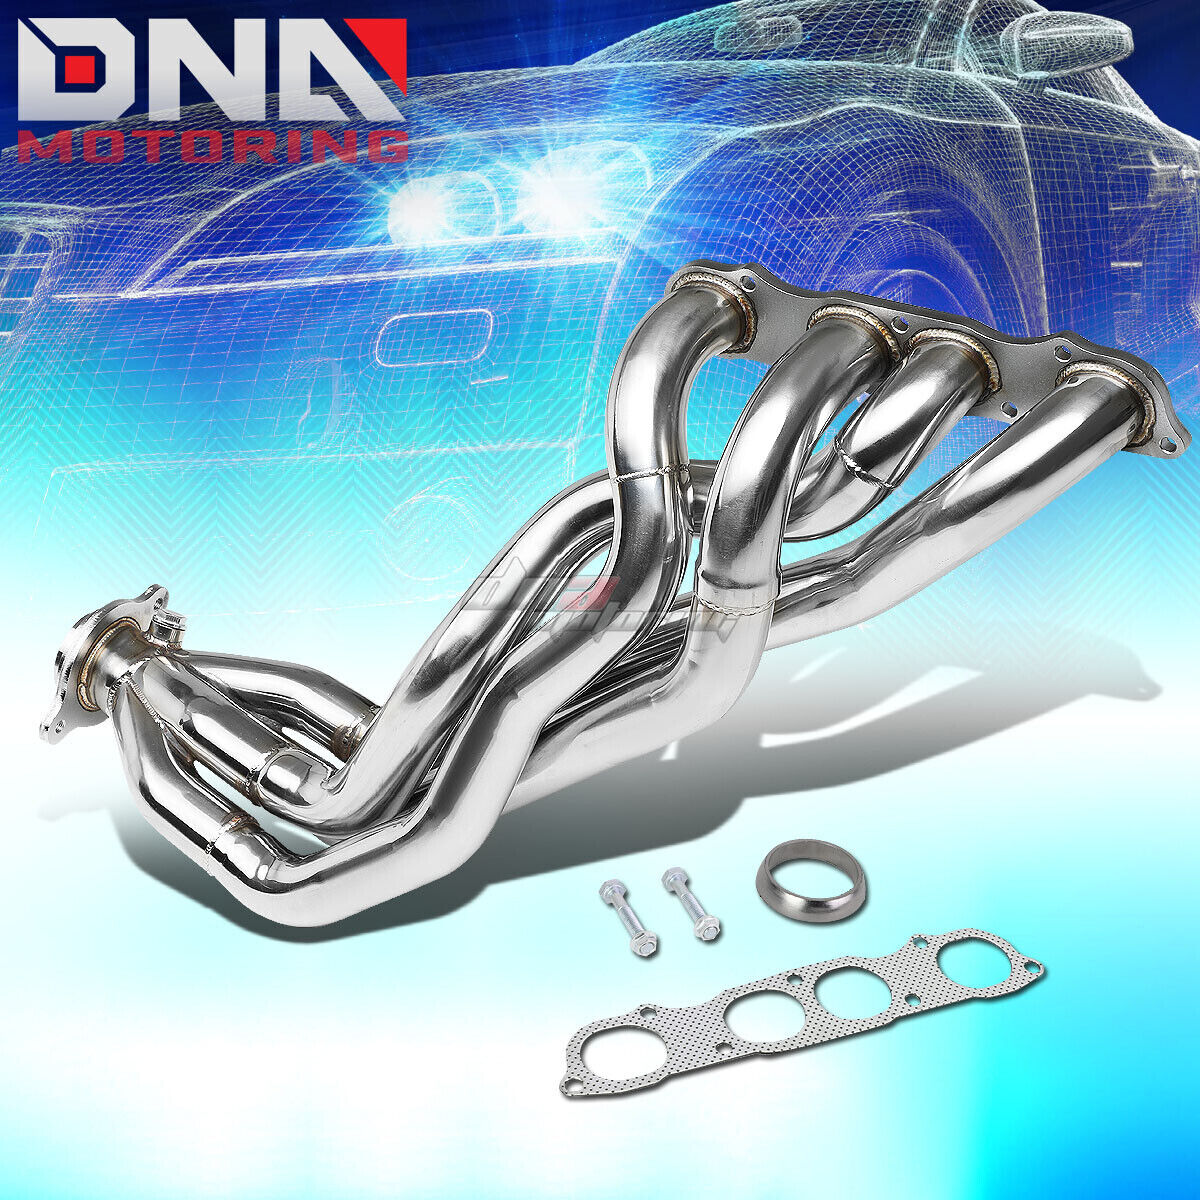 FOR 00-09 S2000 AP1 AP2 STAINLESS STEEL 4-1 LONG TUBE EXHAUST HEADER MANIFOLD